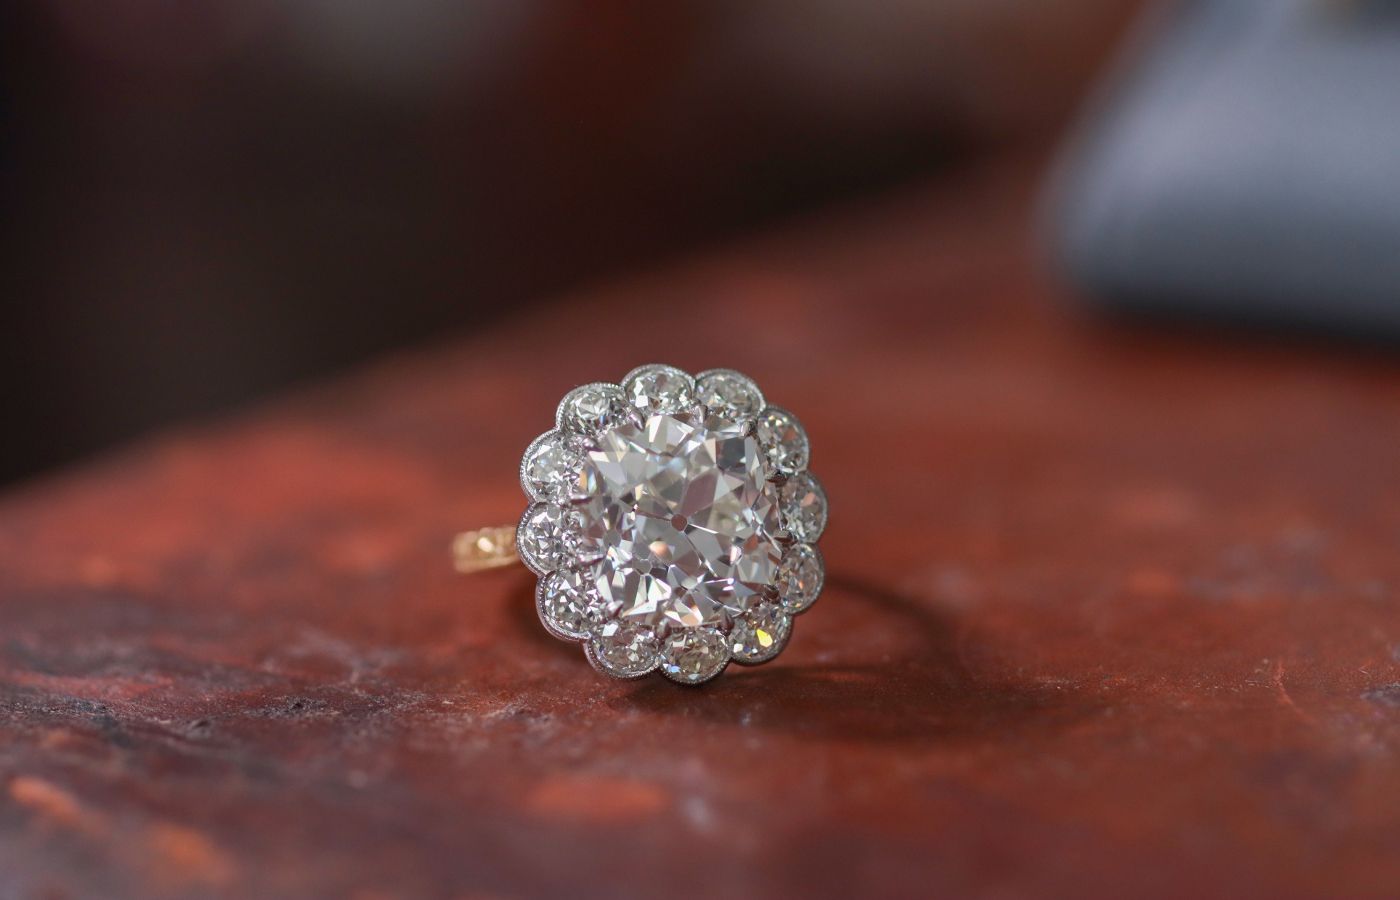 Hancocks Cluster ring featuring a 5.08-ct old mine cushion diamond